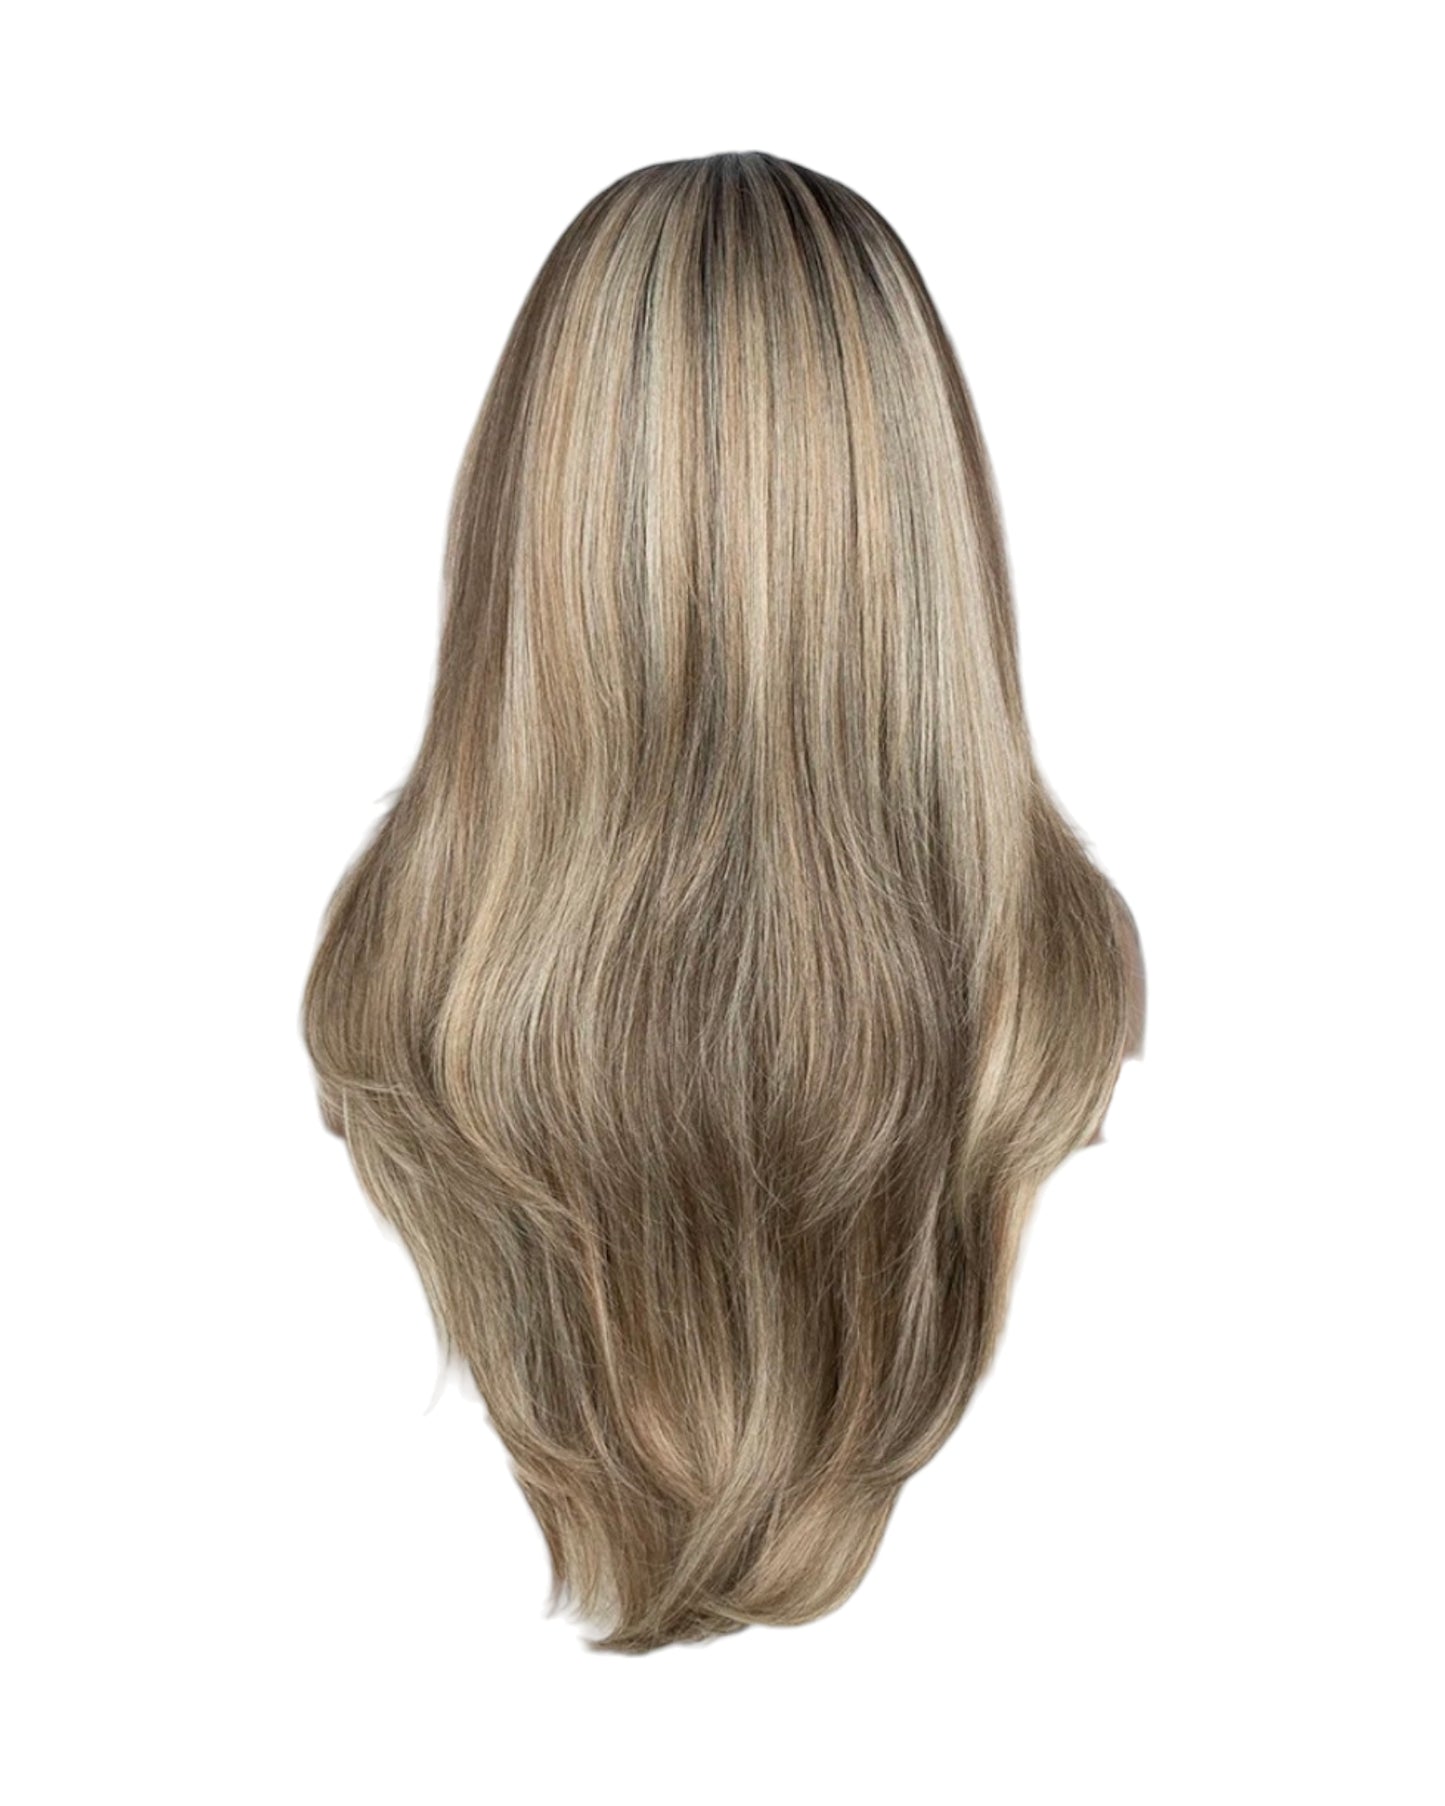 Silver Blonde Middle Part Lace Front Wig. Tai